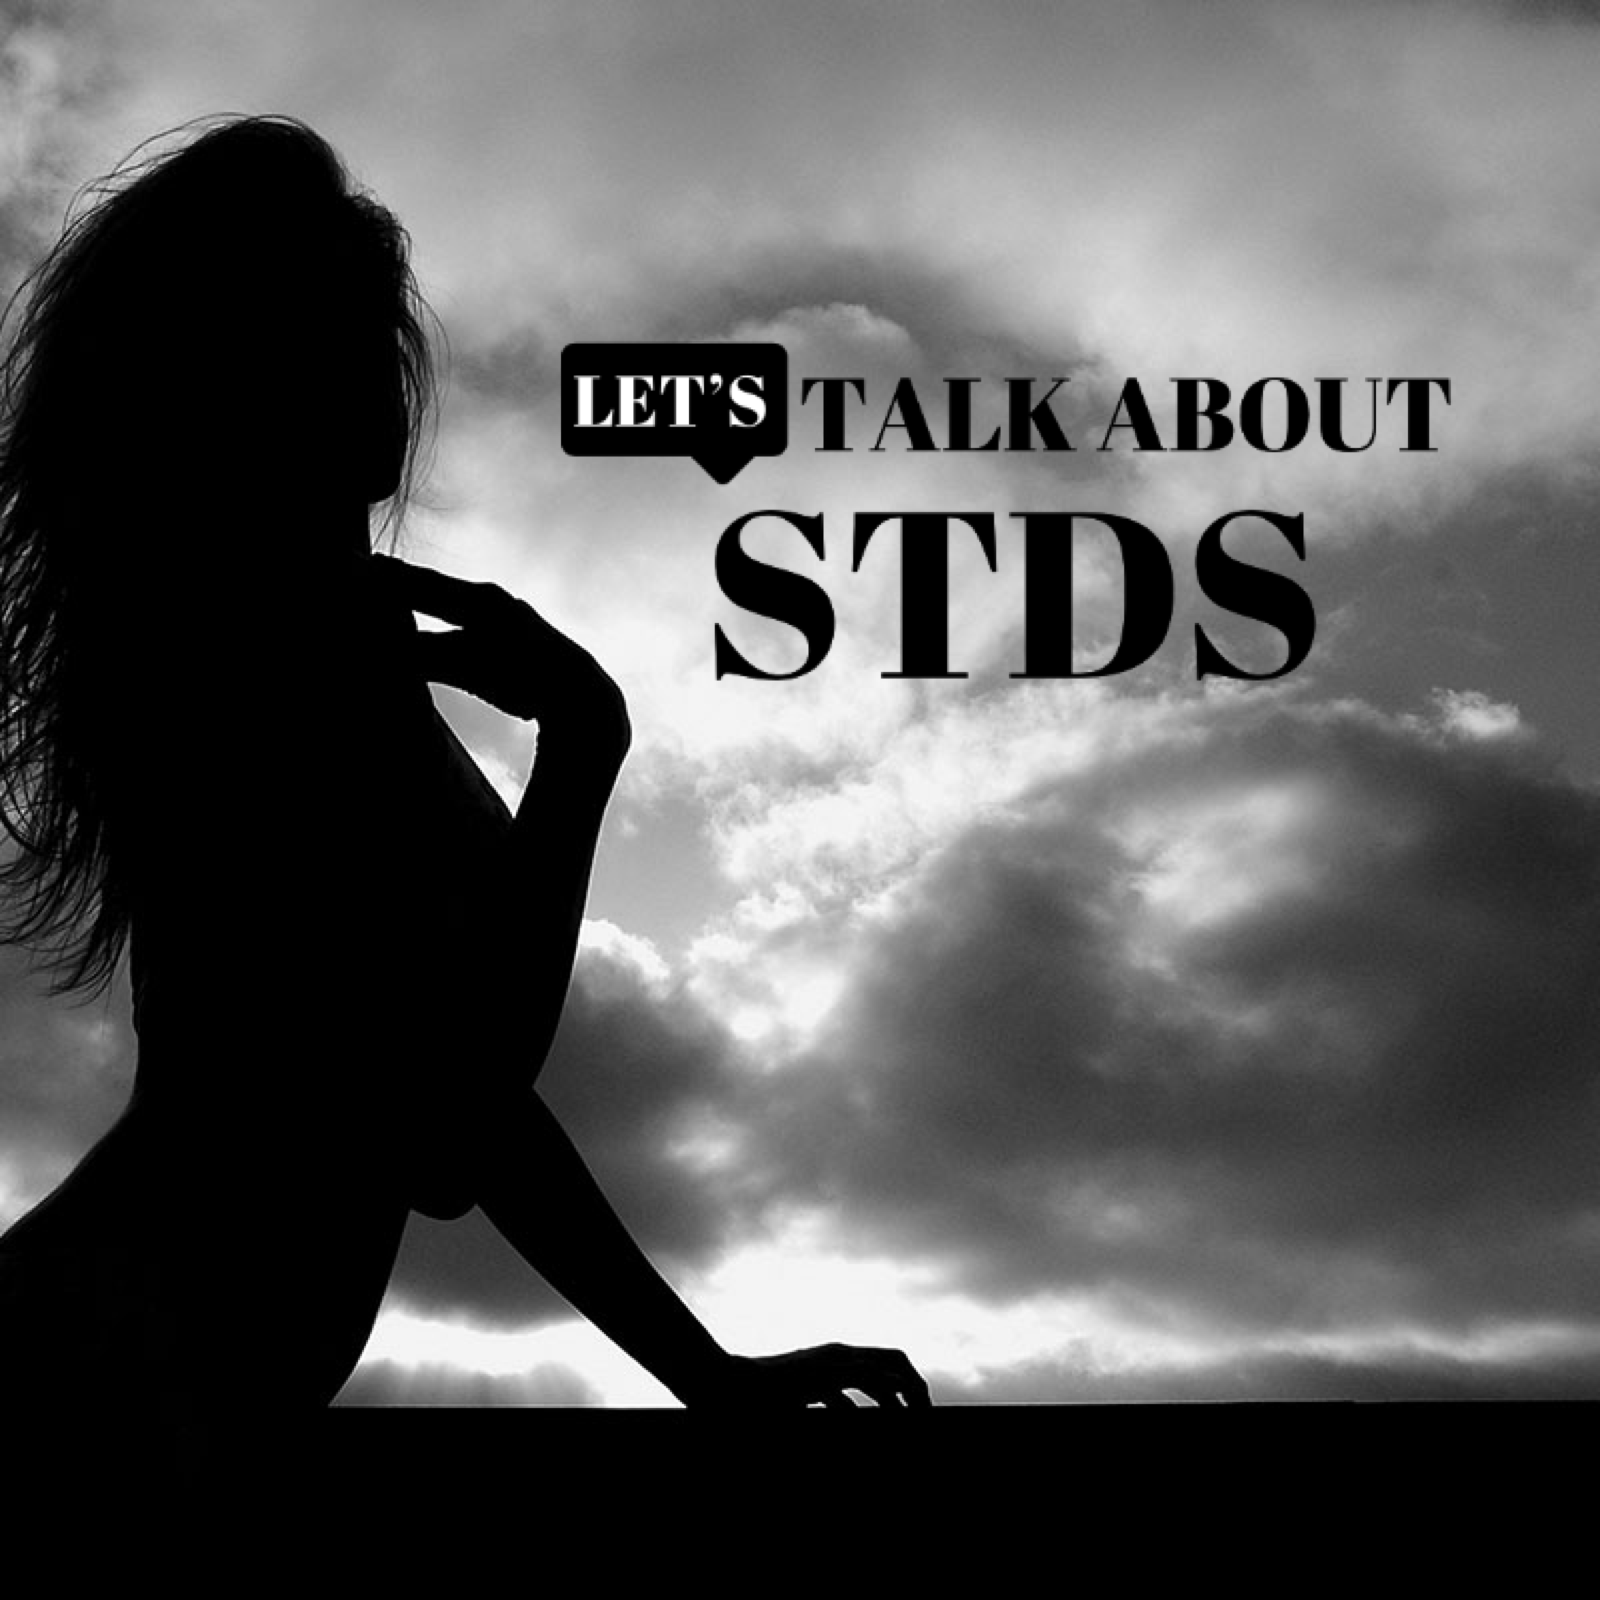 Let’s talk about STDs